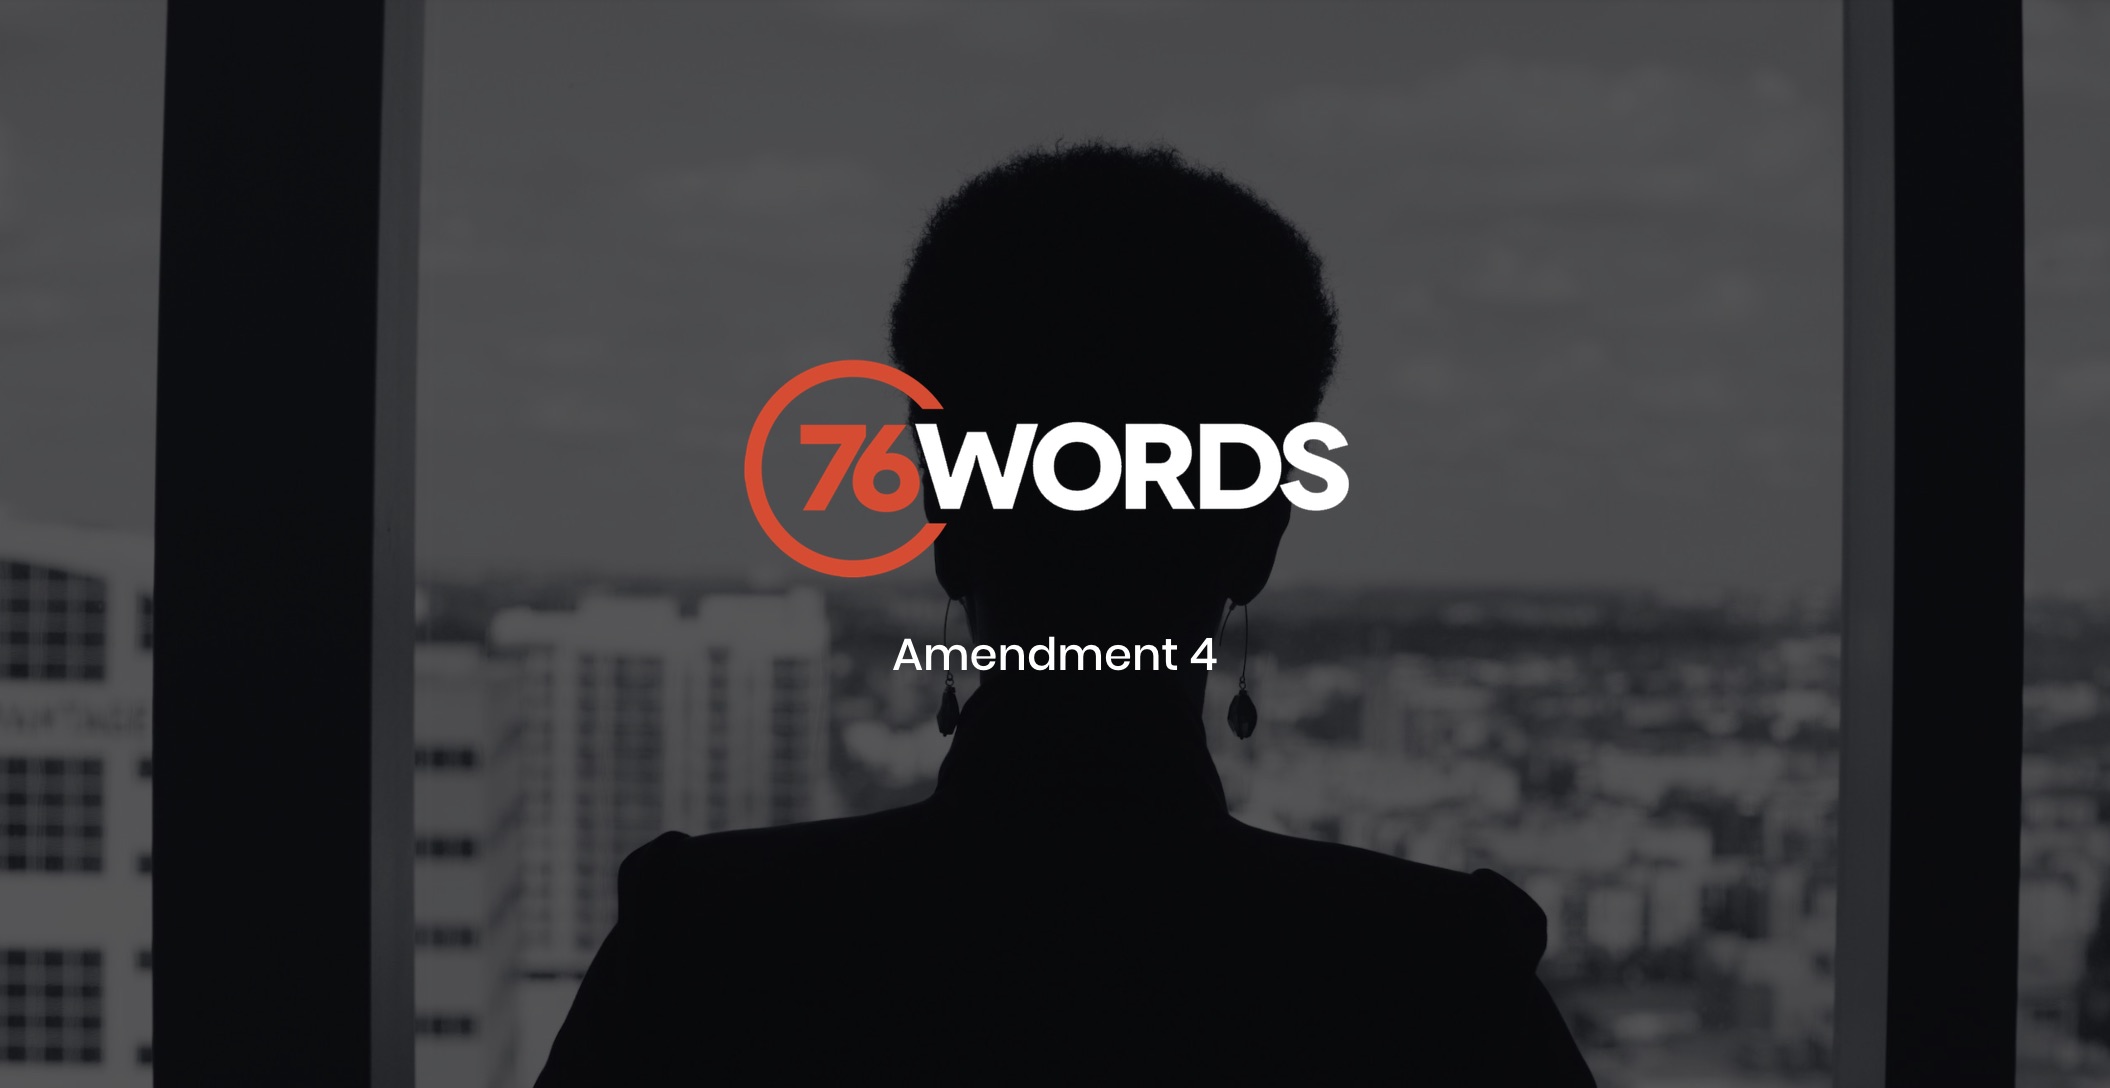 White and orange 76 Words Amendment 4 logo with a dimmed black and white background view from behind silhouette of a woman wearing earrings looking out a window